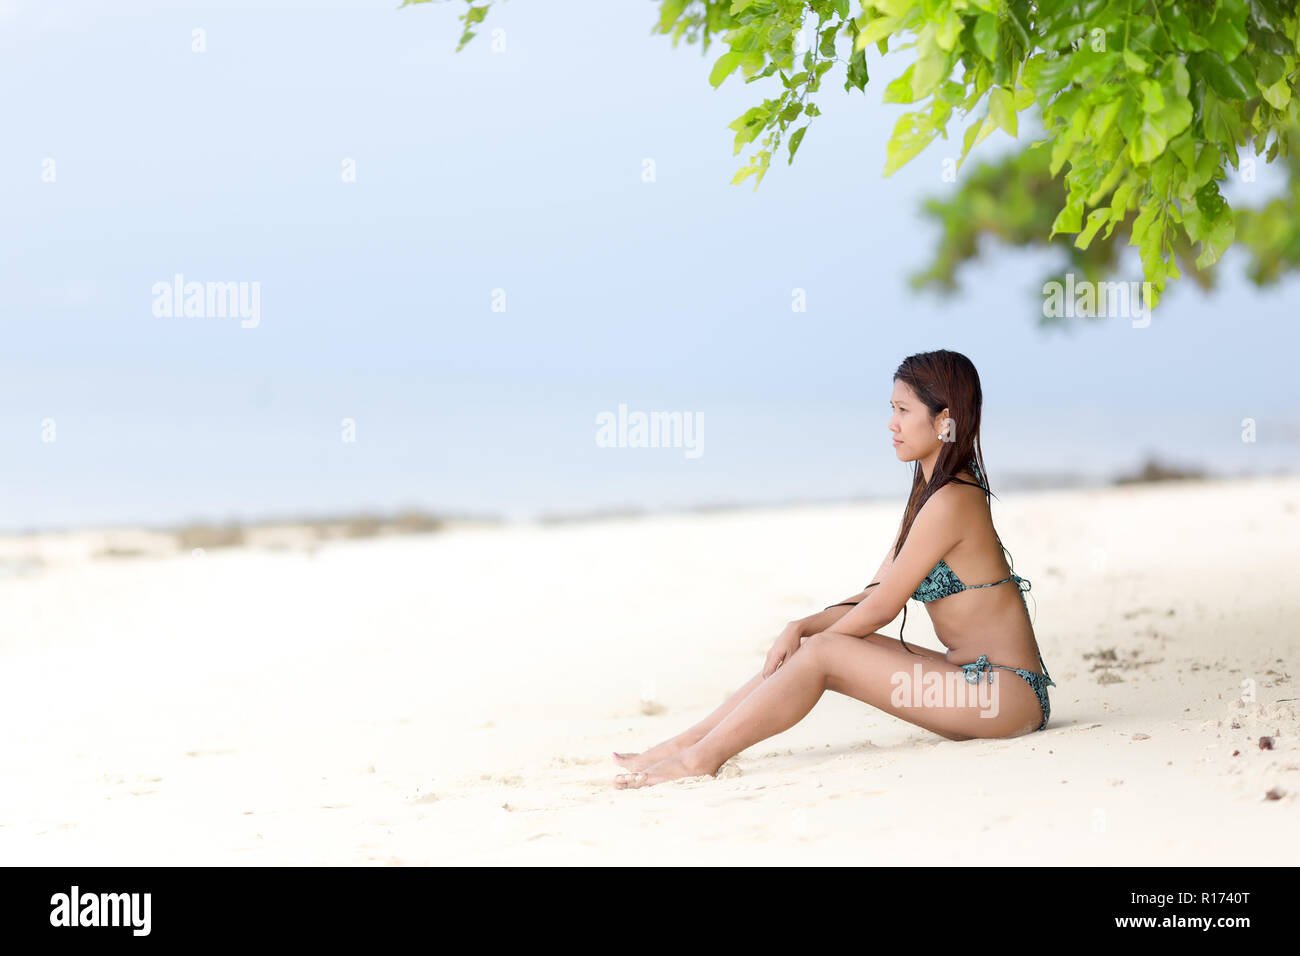 Beautiful Filipina woman sitting in her bikini on a tropical beach in her bikini on the golden sand in the shade of a green leafy tree looking out tow Stock Photo